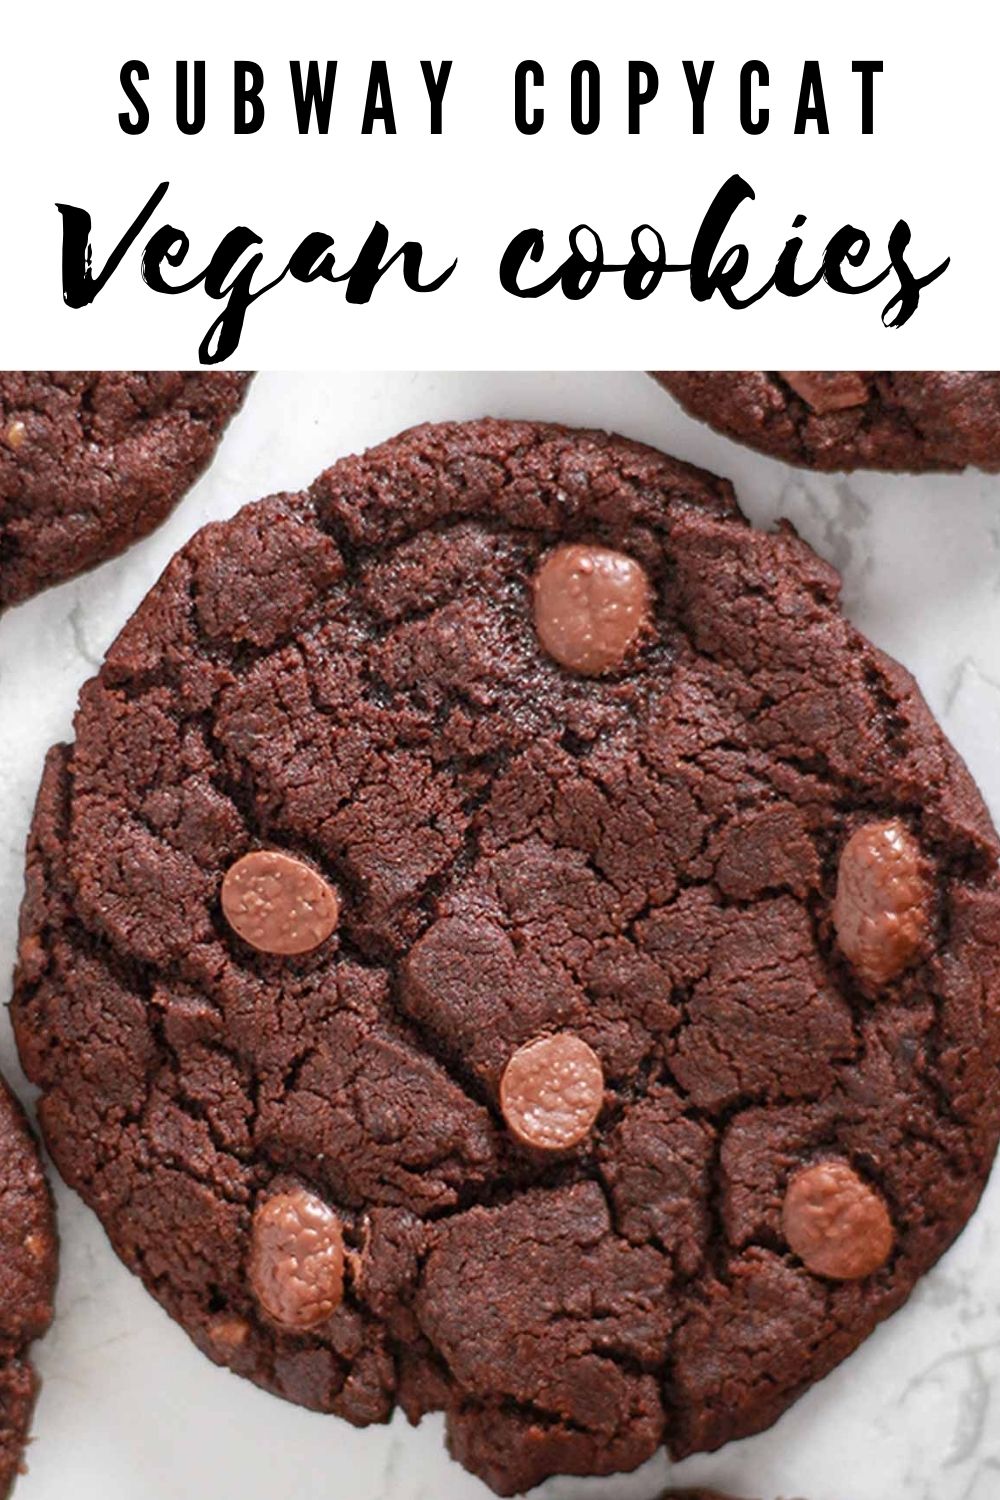 Pinterest Pin with image of chocolate cookie